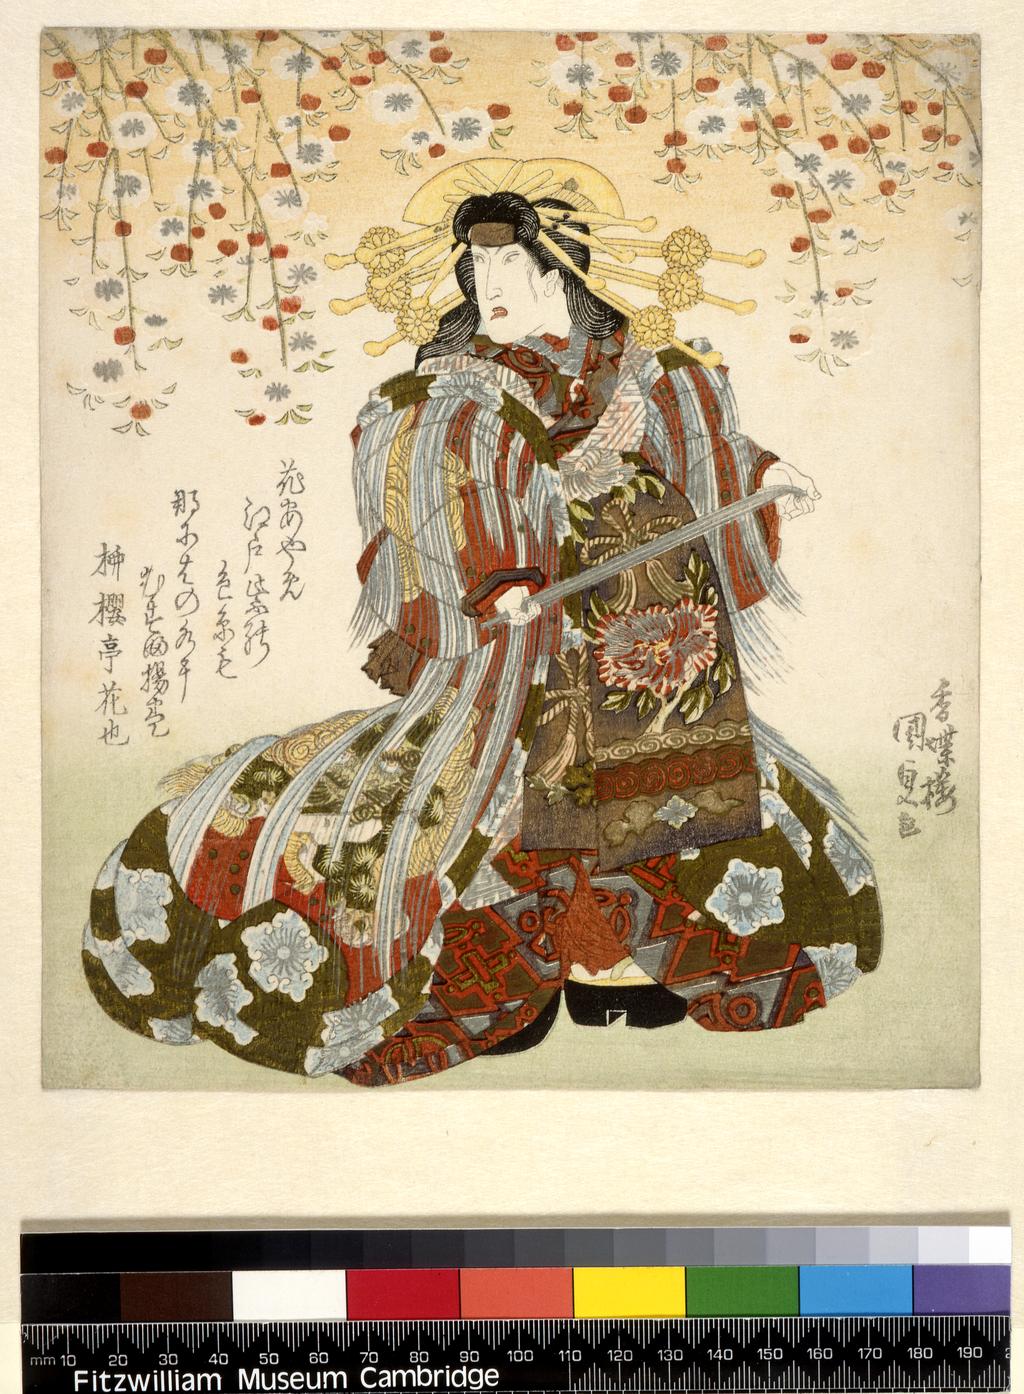 An image of Iwai Kumesaburô II as Agemaki in Sukeroku yukari no Edo zakura (Sukeroku’s affinity for the cherry blossoms of Edo). Kunisada, Utagawa (Japanese, 1786-1865). Surimono. Colour prints from woodblocks, with metallic pigment and blind embossing (karazuri). Shikishiban. Signed: Kôchôrô Kunisada ga, with artist’s double toshidama seal (left sheet). Poets: Ryûkatei Fûshi Mizugaki and Ryûôtei Hananari (right) and Ryûôtei Hananari (left). c.1830. Ukiyo-e.  Notes: Two sheets from a set of five showing a scene from one of the Eighteen Plays (Kabuki Jûhachiban) selected by Danjûrô VII as specially associated with the Ichikawa lineage of actors. The missing central sheet shows Danjûrô VII in the role of Sukeroku. The missing outer sheets show the villain Ikyû (right) and the noodle-seller Fukeroku (left). The print was probably made in connection with a performance planned in Osaka for New Year of 1830. The actors’ journey from Edo is reflected in the imagery of the poems. However, Iwai was summoned back to Edo by the city administration (machi-bugyo), as he was being sued by the head of the Ichimura theatre, so the performance could not take place as planned. Sukeroku is in reality Soga no Gorô, while Shimbei the sake seller is actually Gorô’s gentler elder brother, Soga no Jûrô (he wears a costume decorated with the Jûro’s flying-plovers pattern, see P.502-1937). Sukeroku learns that his missing heirloom sword Tomokirimaru is in the possession of Ikyû, the patron of Sukeroku’s secret lover Agemaki, who is a Yoshiwara courtesan. He subsequently wins the sword back in a fight in which Ikkyû is killed, and escapes with the help of Agemaki. A poem on the sheet depicting Kumesaburo alludes to irises, one of the actor’s symbols, while the reference to Edo purple (murasaki) also alludes to the purple headband worn by Sukeroku in this play: ‘Lovely coloured strands of iris flowers, purple as Edo, flow in streams to Naniwa [Osaka] and knot Agemaki